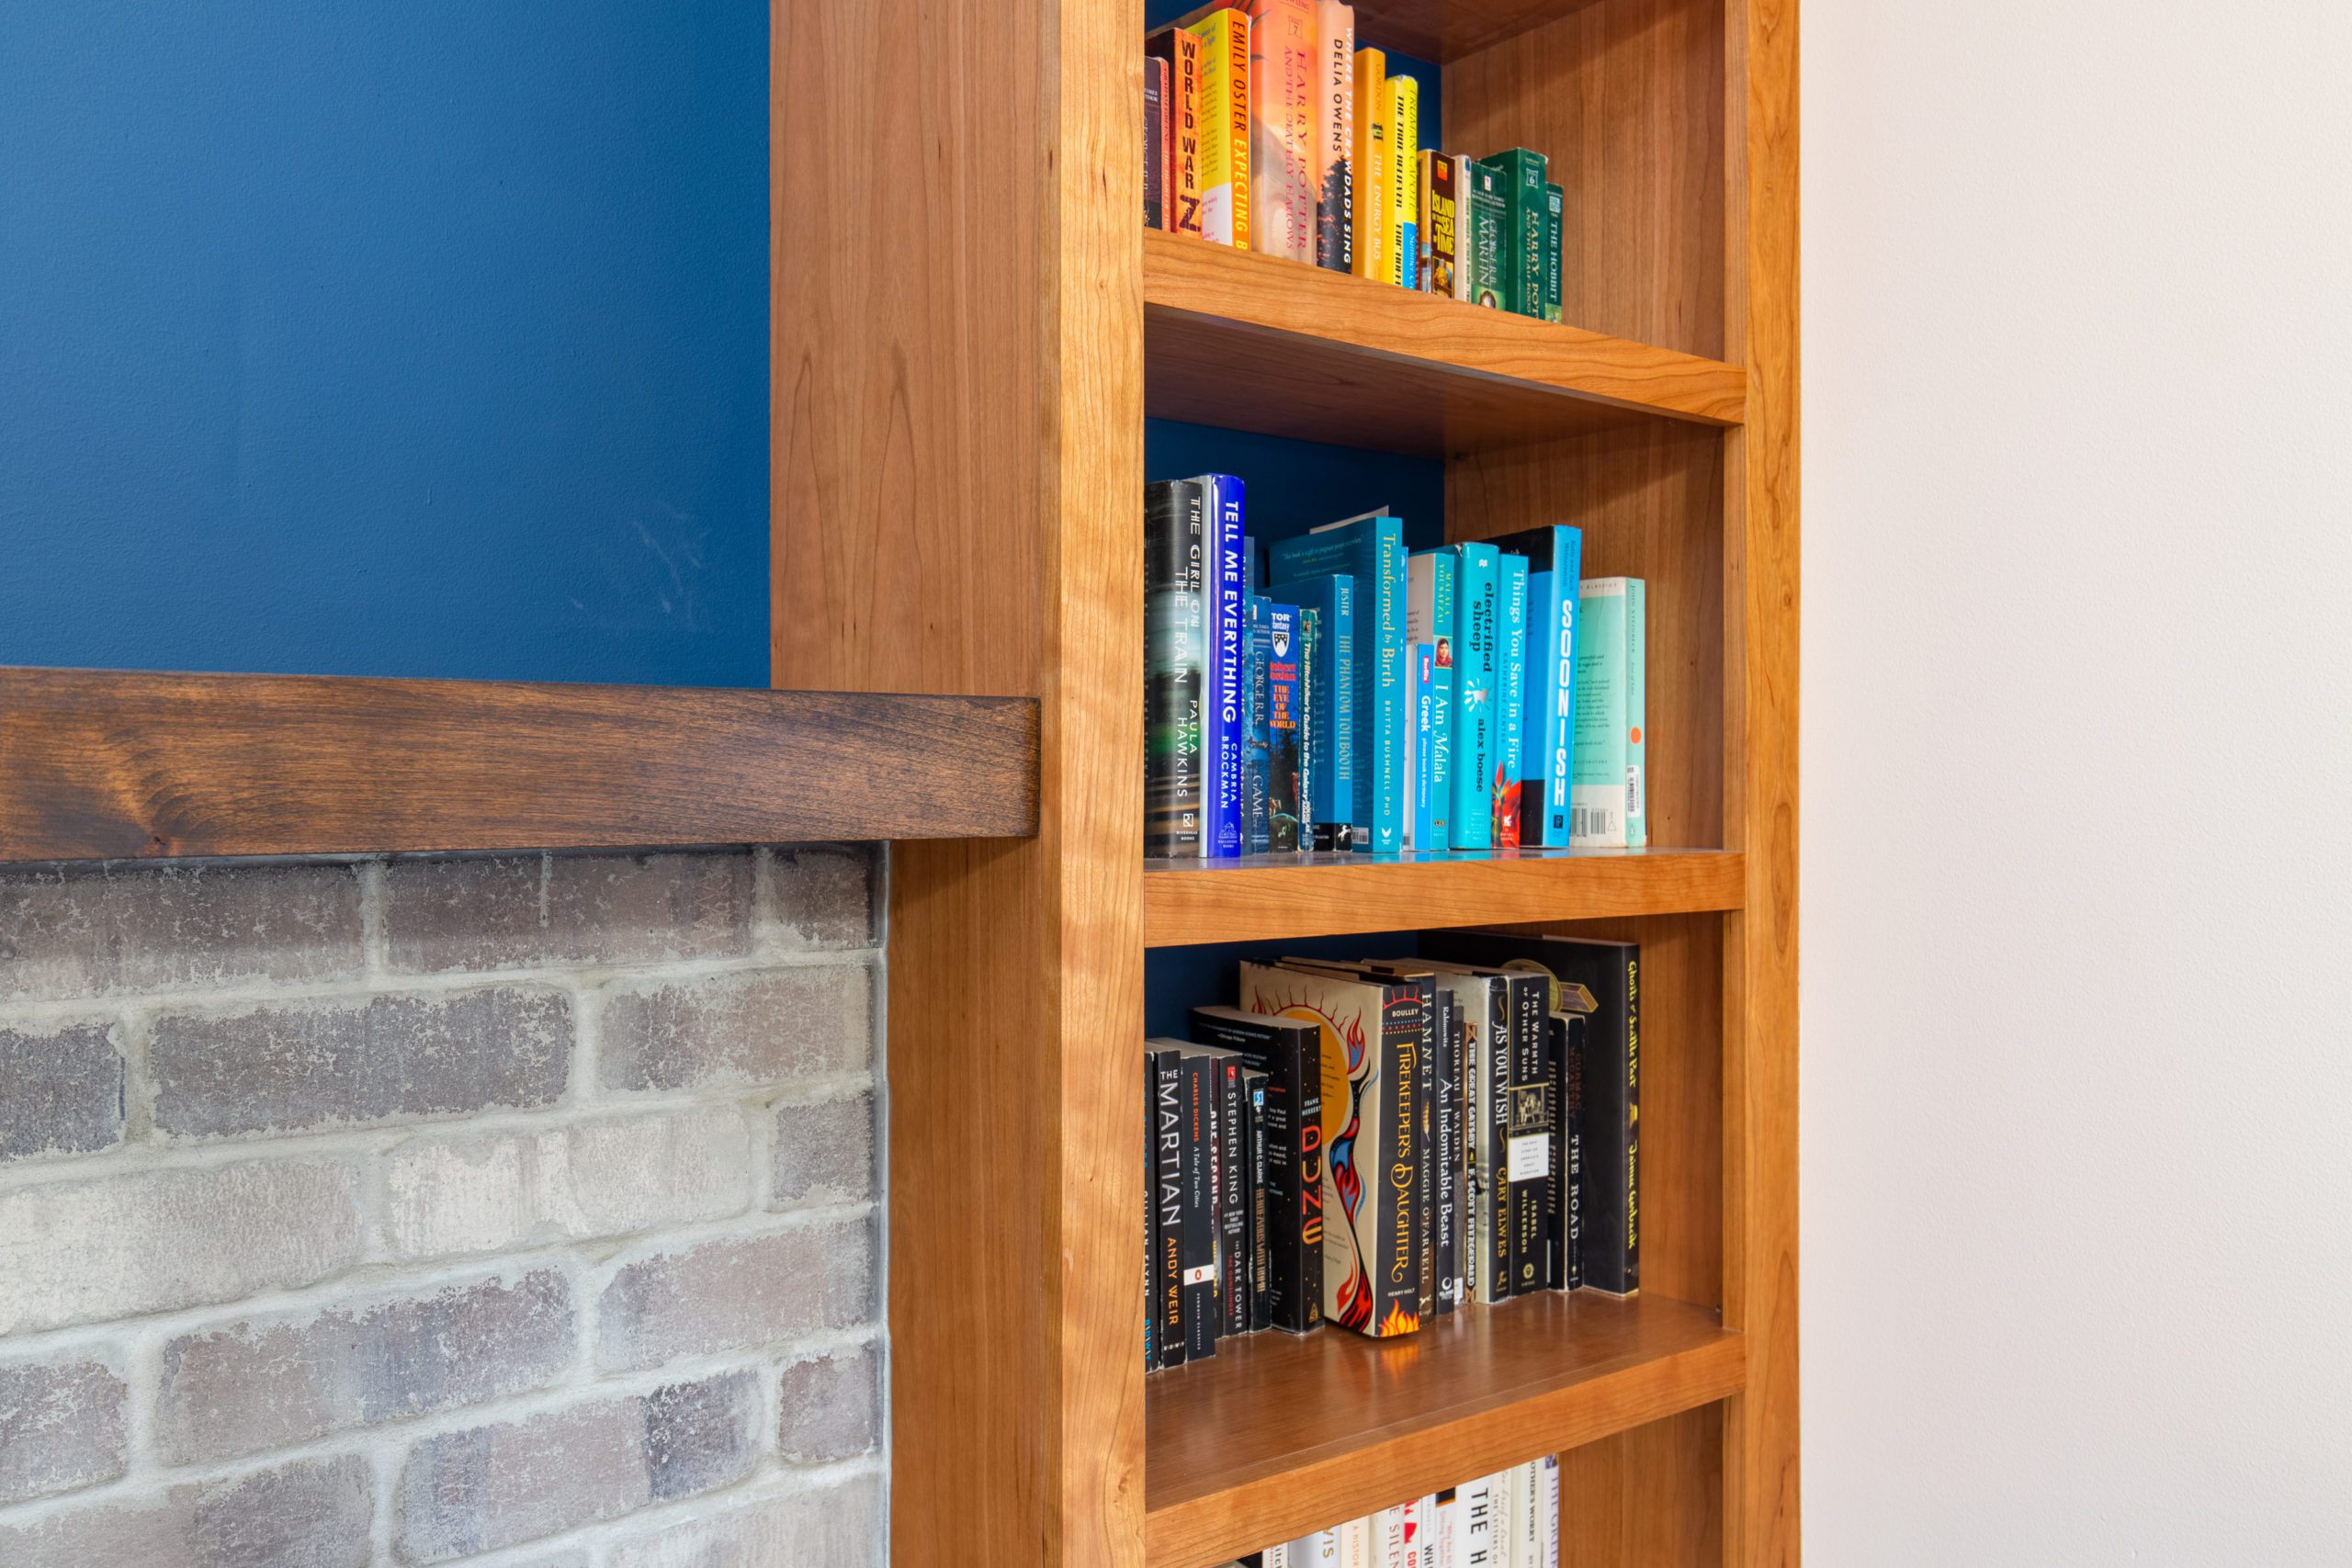 Book shelf built into a blue wall with a fireplace built next to it with wooden and stone details